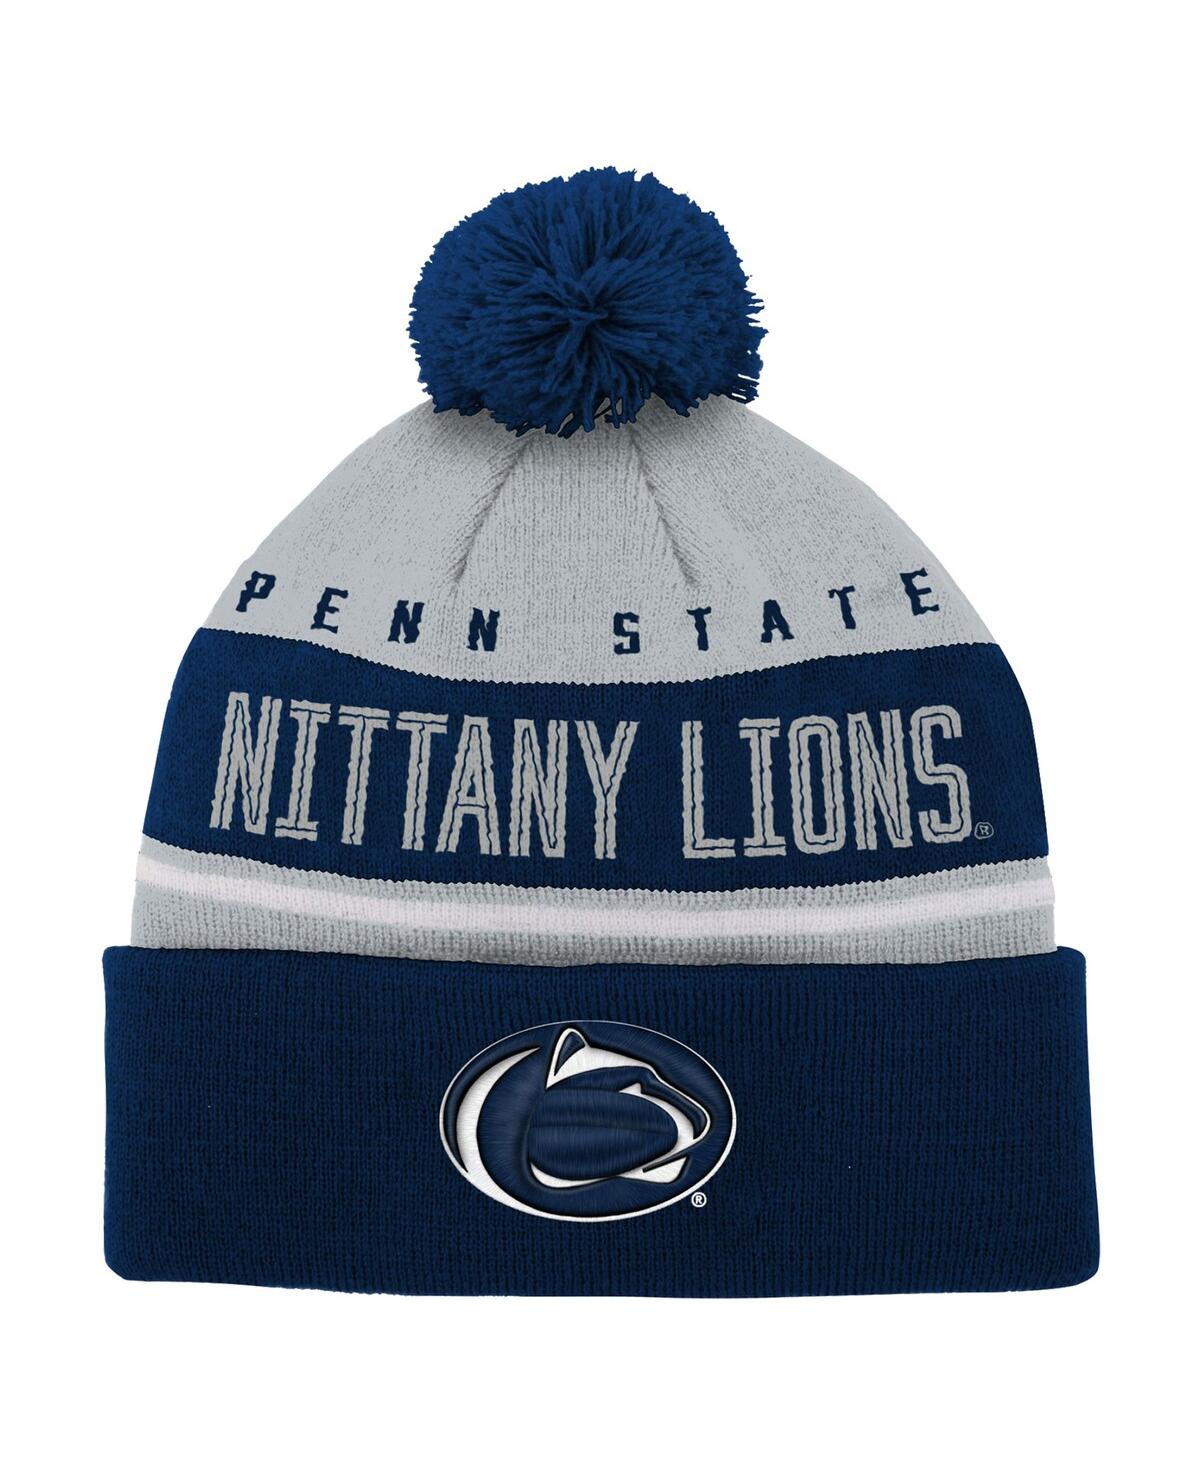 Outerstuff Kids' Youth Boys Navy Penn State Nittany Lions Redzone Jacquard Cuffed Knit Hat With Pom